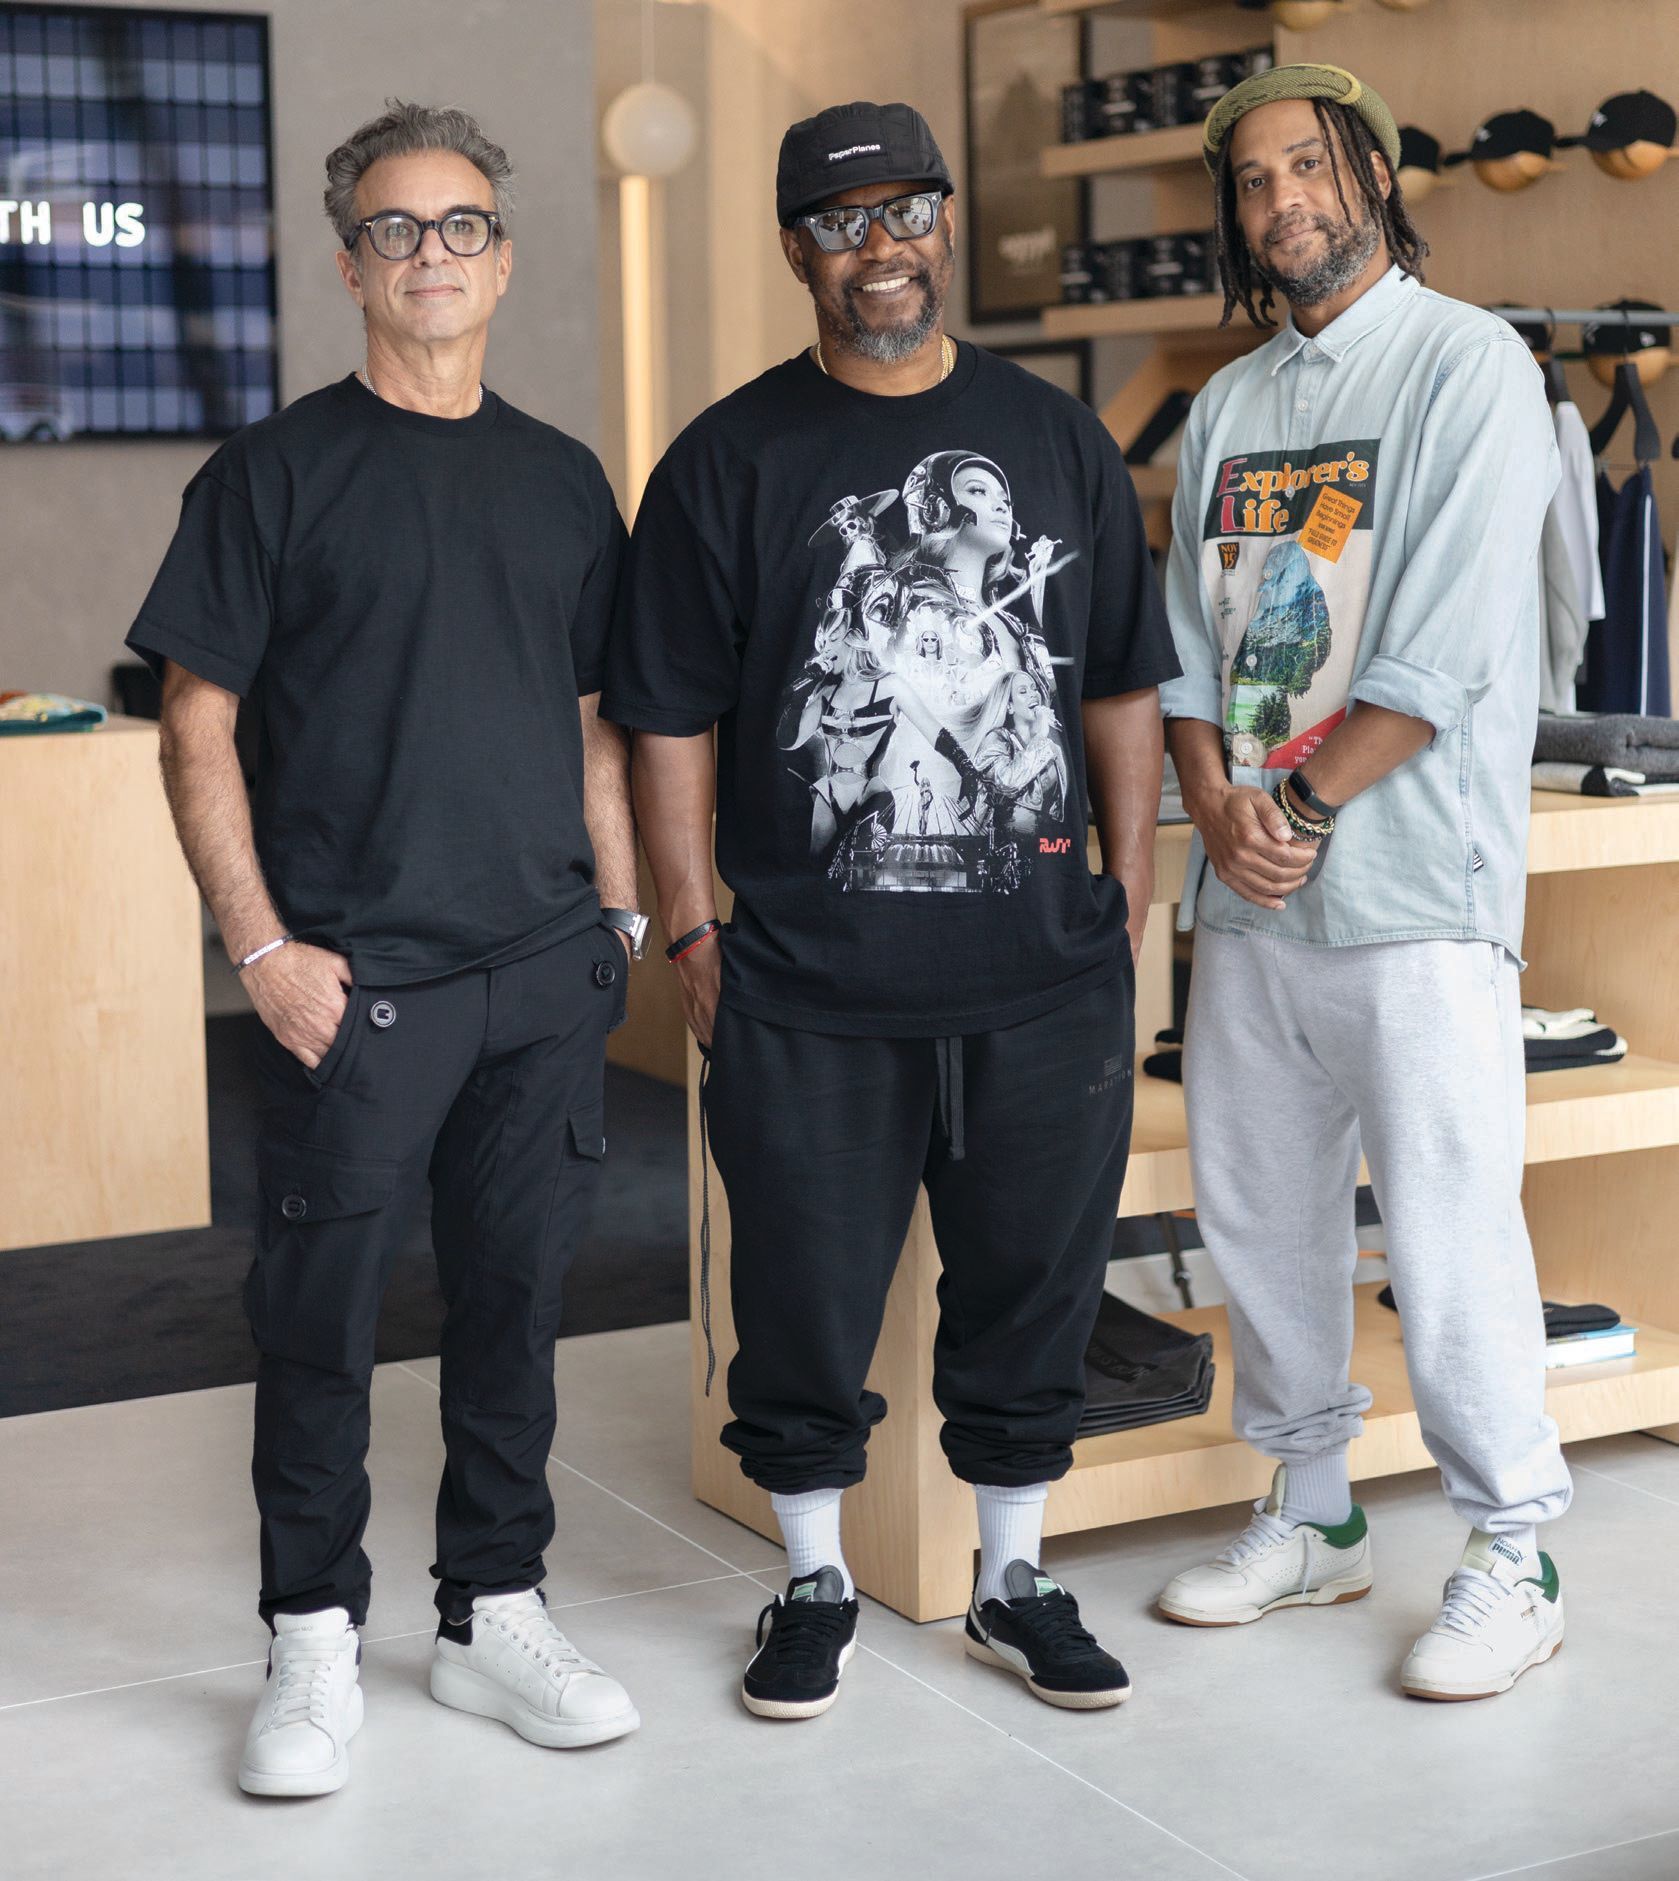 Ronnie DeMichael (president), Emory Jones (co-founder and CMO) and Just C (creative director). PHOTO BY ALEXA HOYER